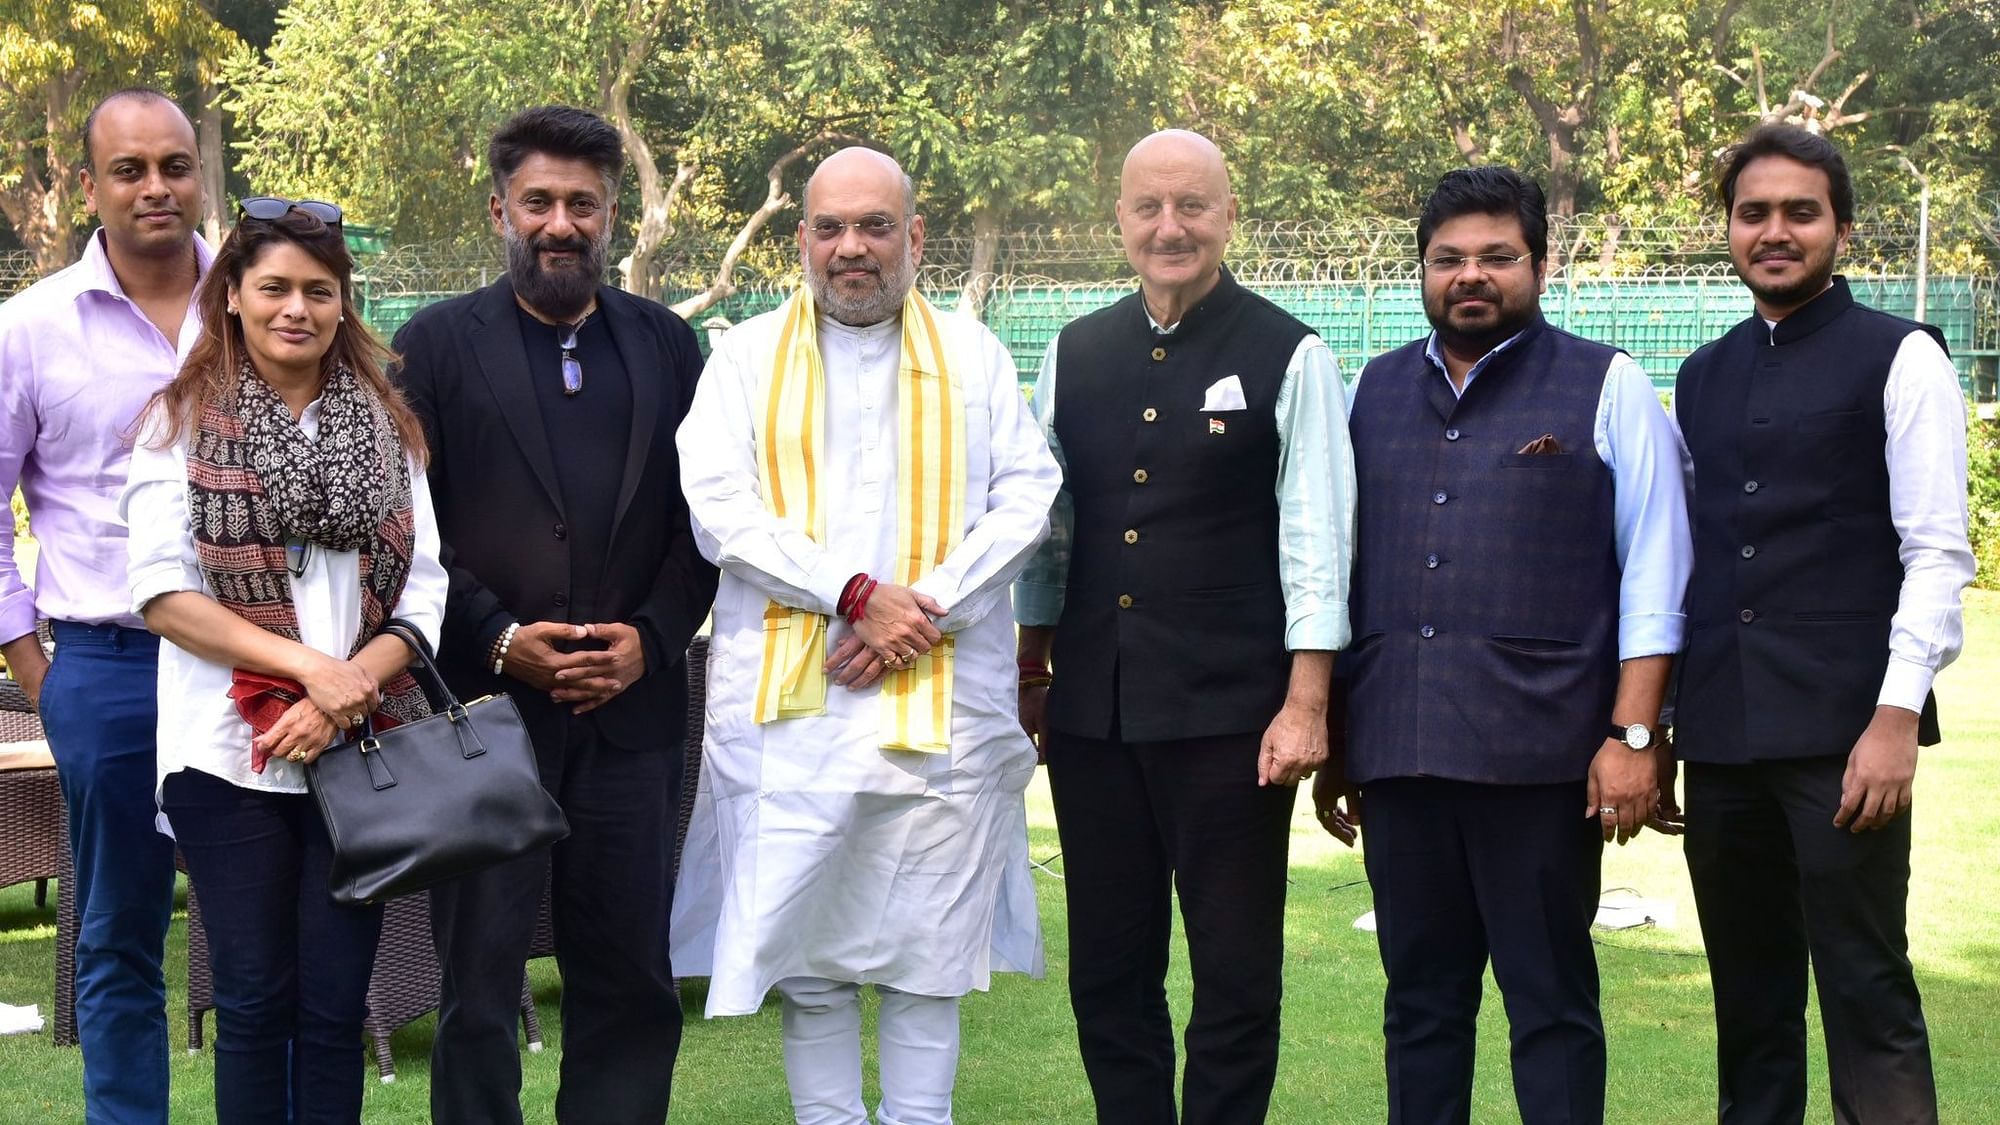 <div class="paragraphs"><p>Union Home Minister Amit Shah on Wednesday, 16 March, met with the team of the film The Kashmir Files, and hailed the movie based on the Kashmiri Pandit exodus of the early 1990s as a "bold representation of truth."</p></div>